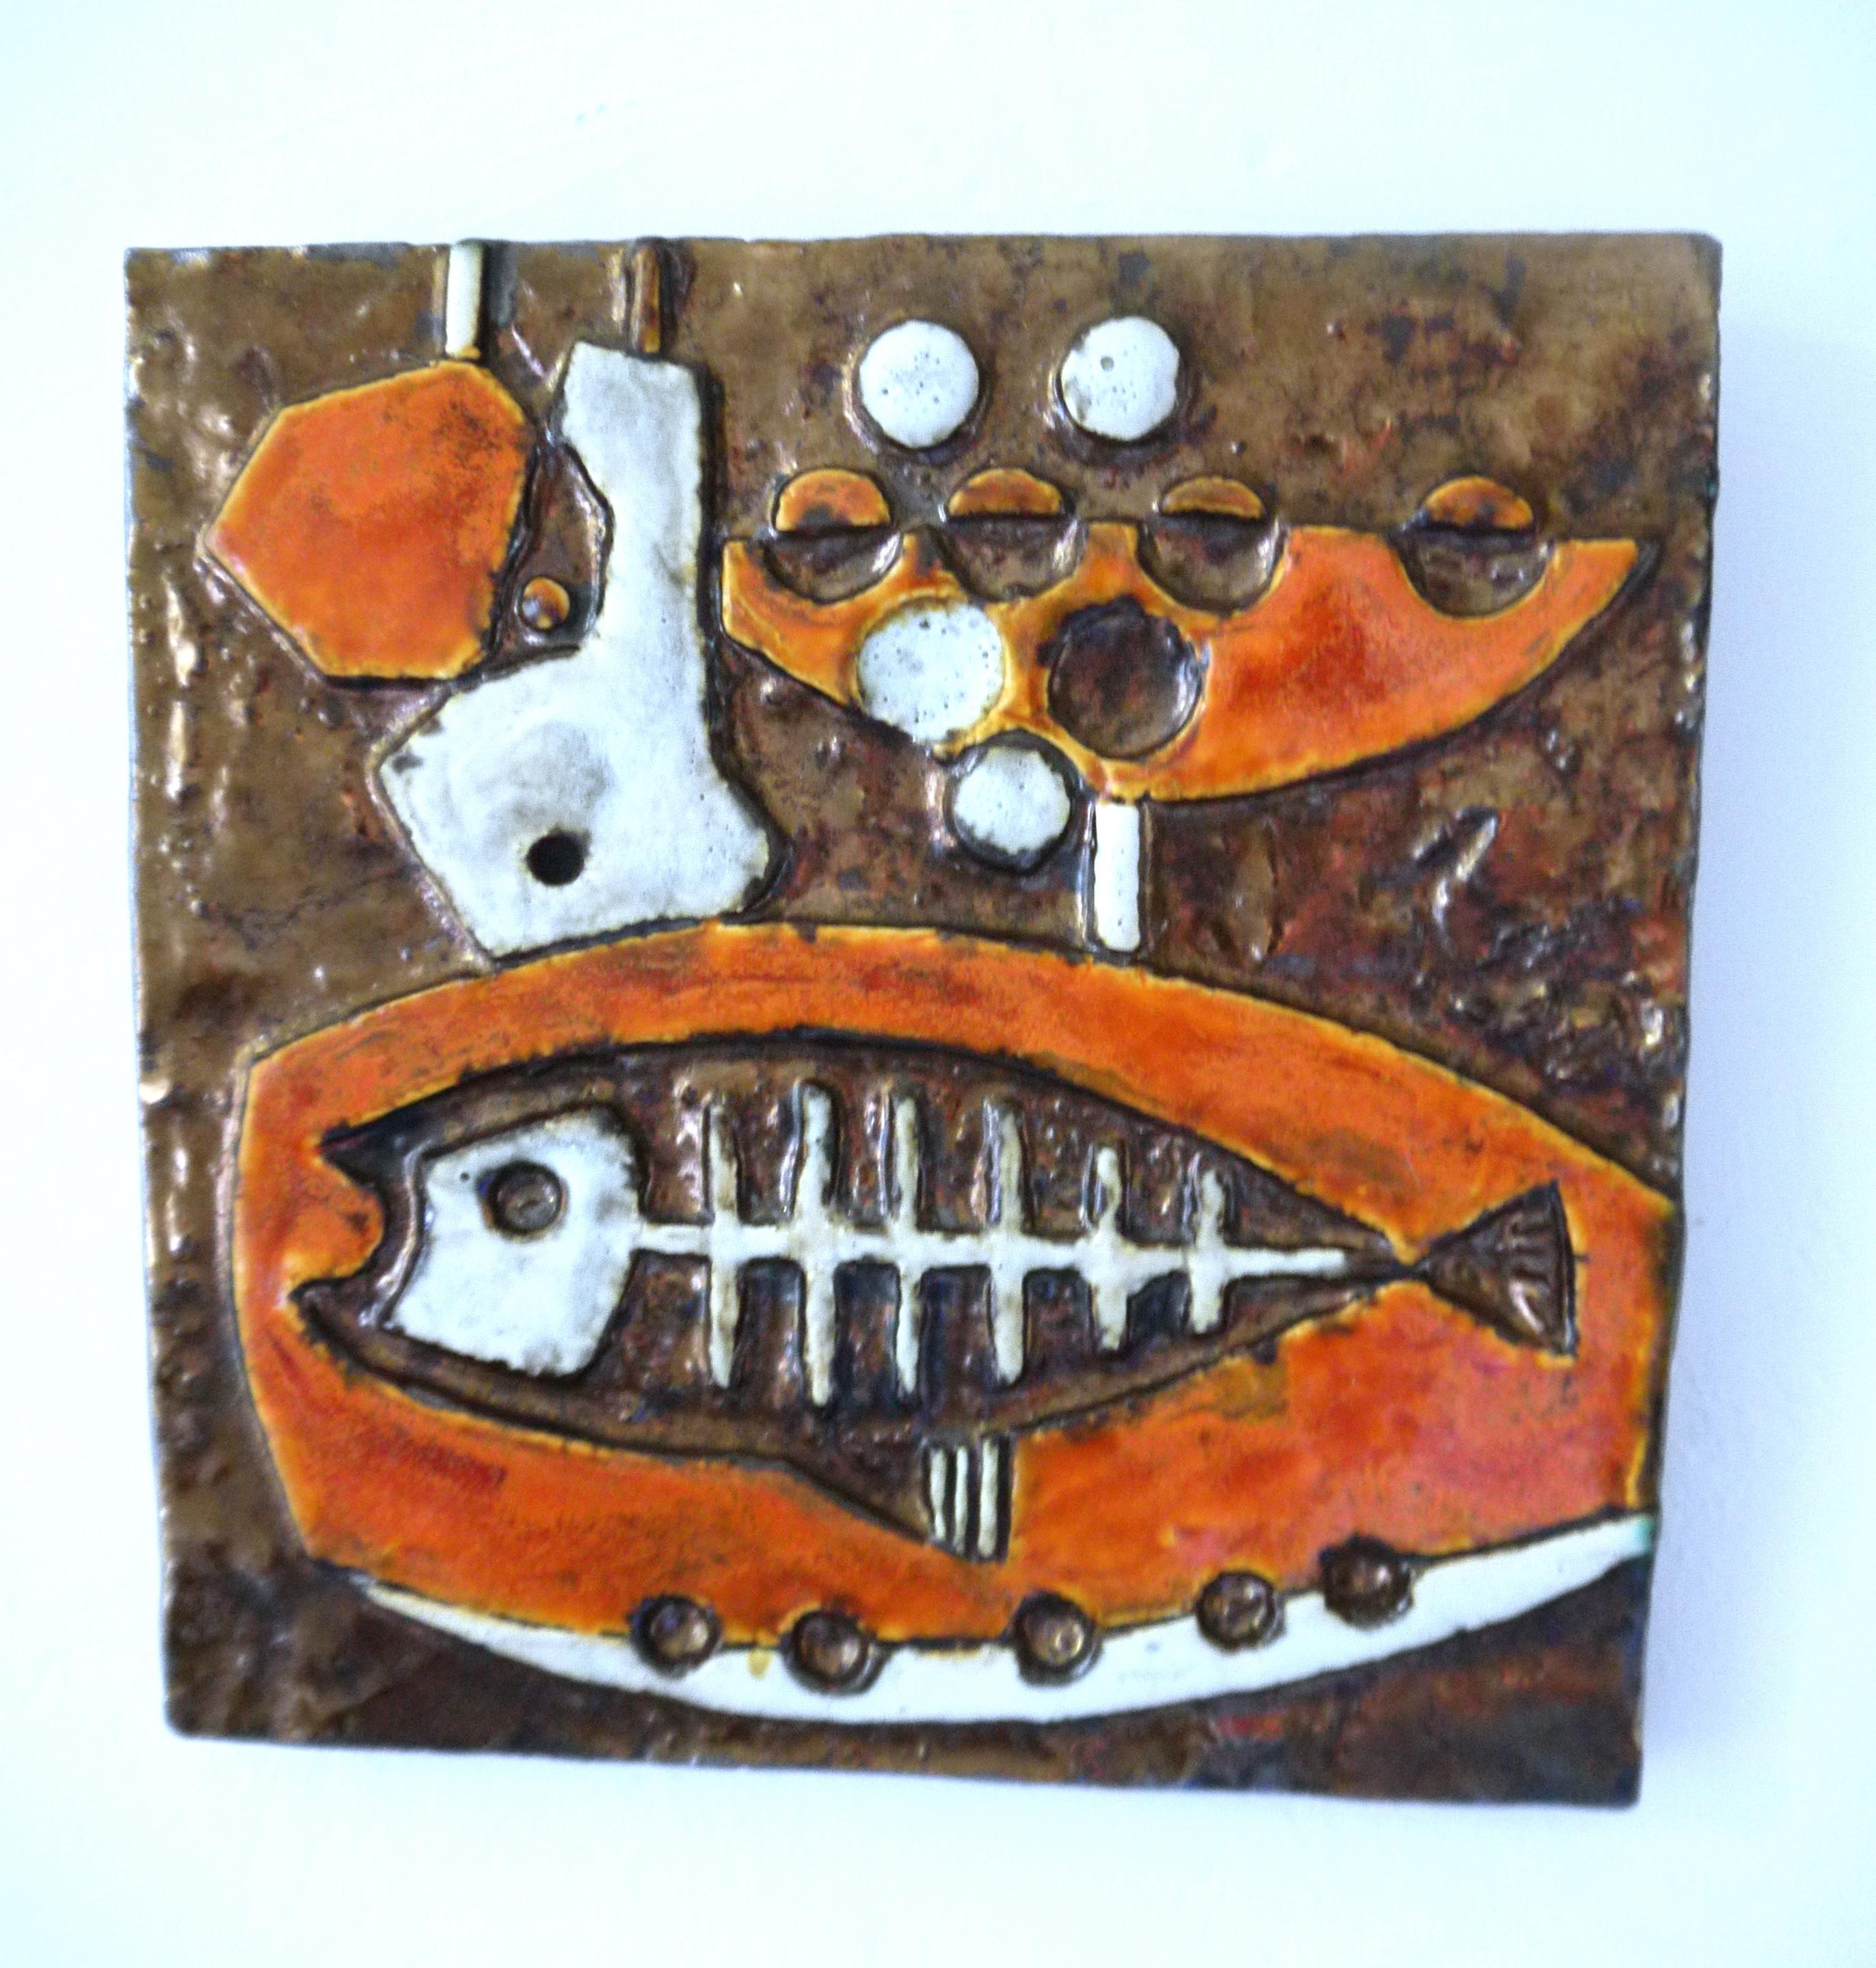 Modernist Ceramic Wall Plaques, Set of Three by Helmut Schaffenacker Late 1950s For Sale 1